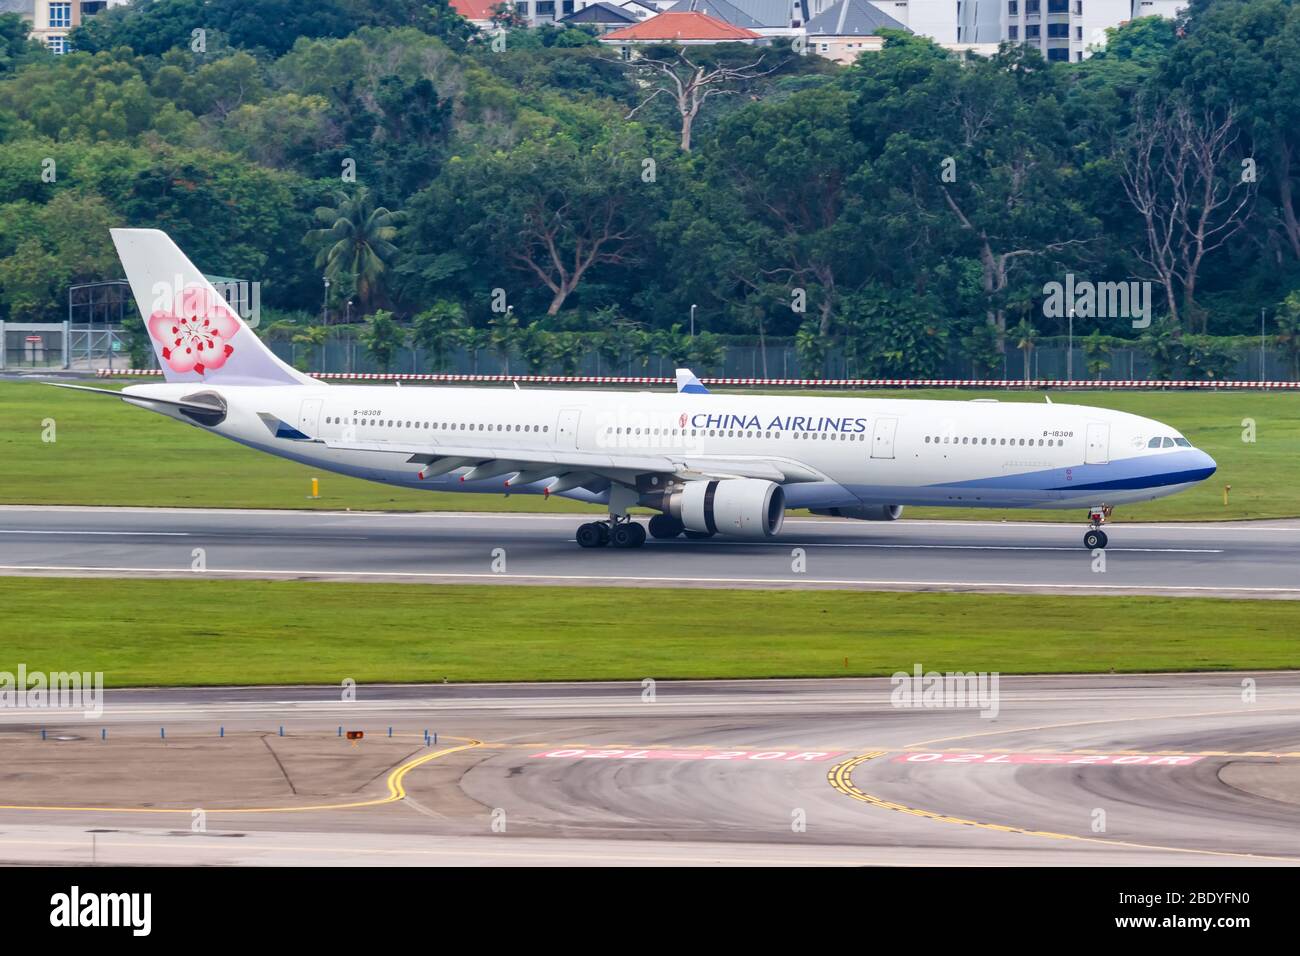 Changi, Singapore – January 29, 2018: China Airlines Airbus A330-300 airplane at Changi airport (SIN) in Singapore. Airbus is a European aircraft manu Stock Photo